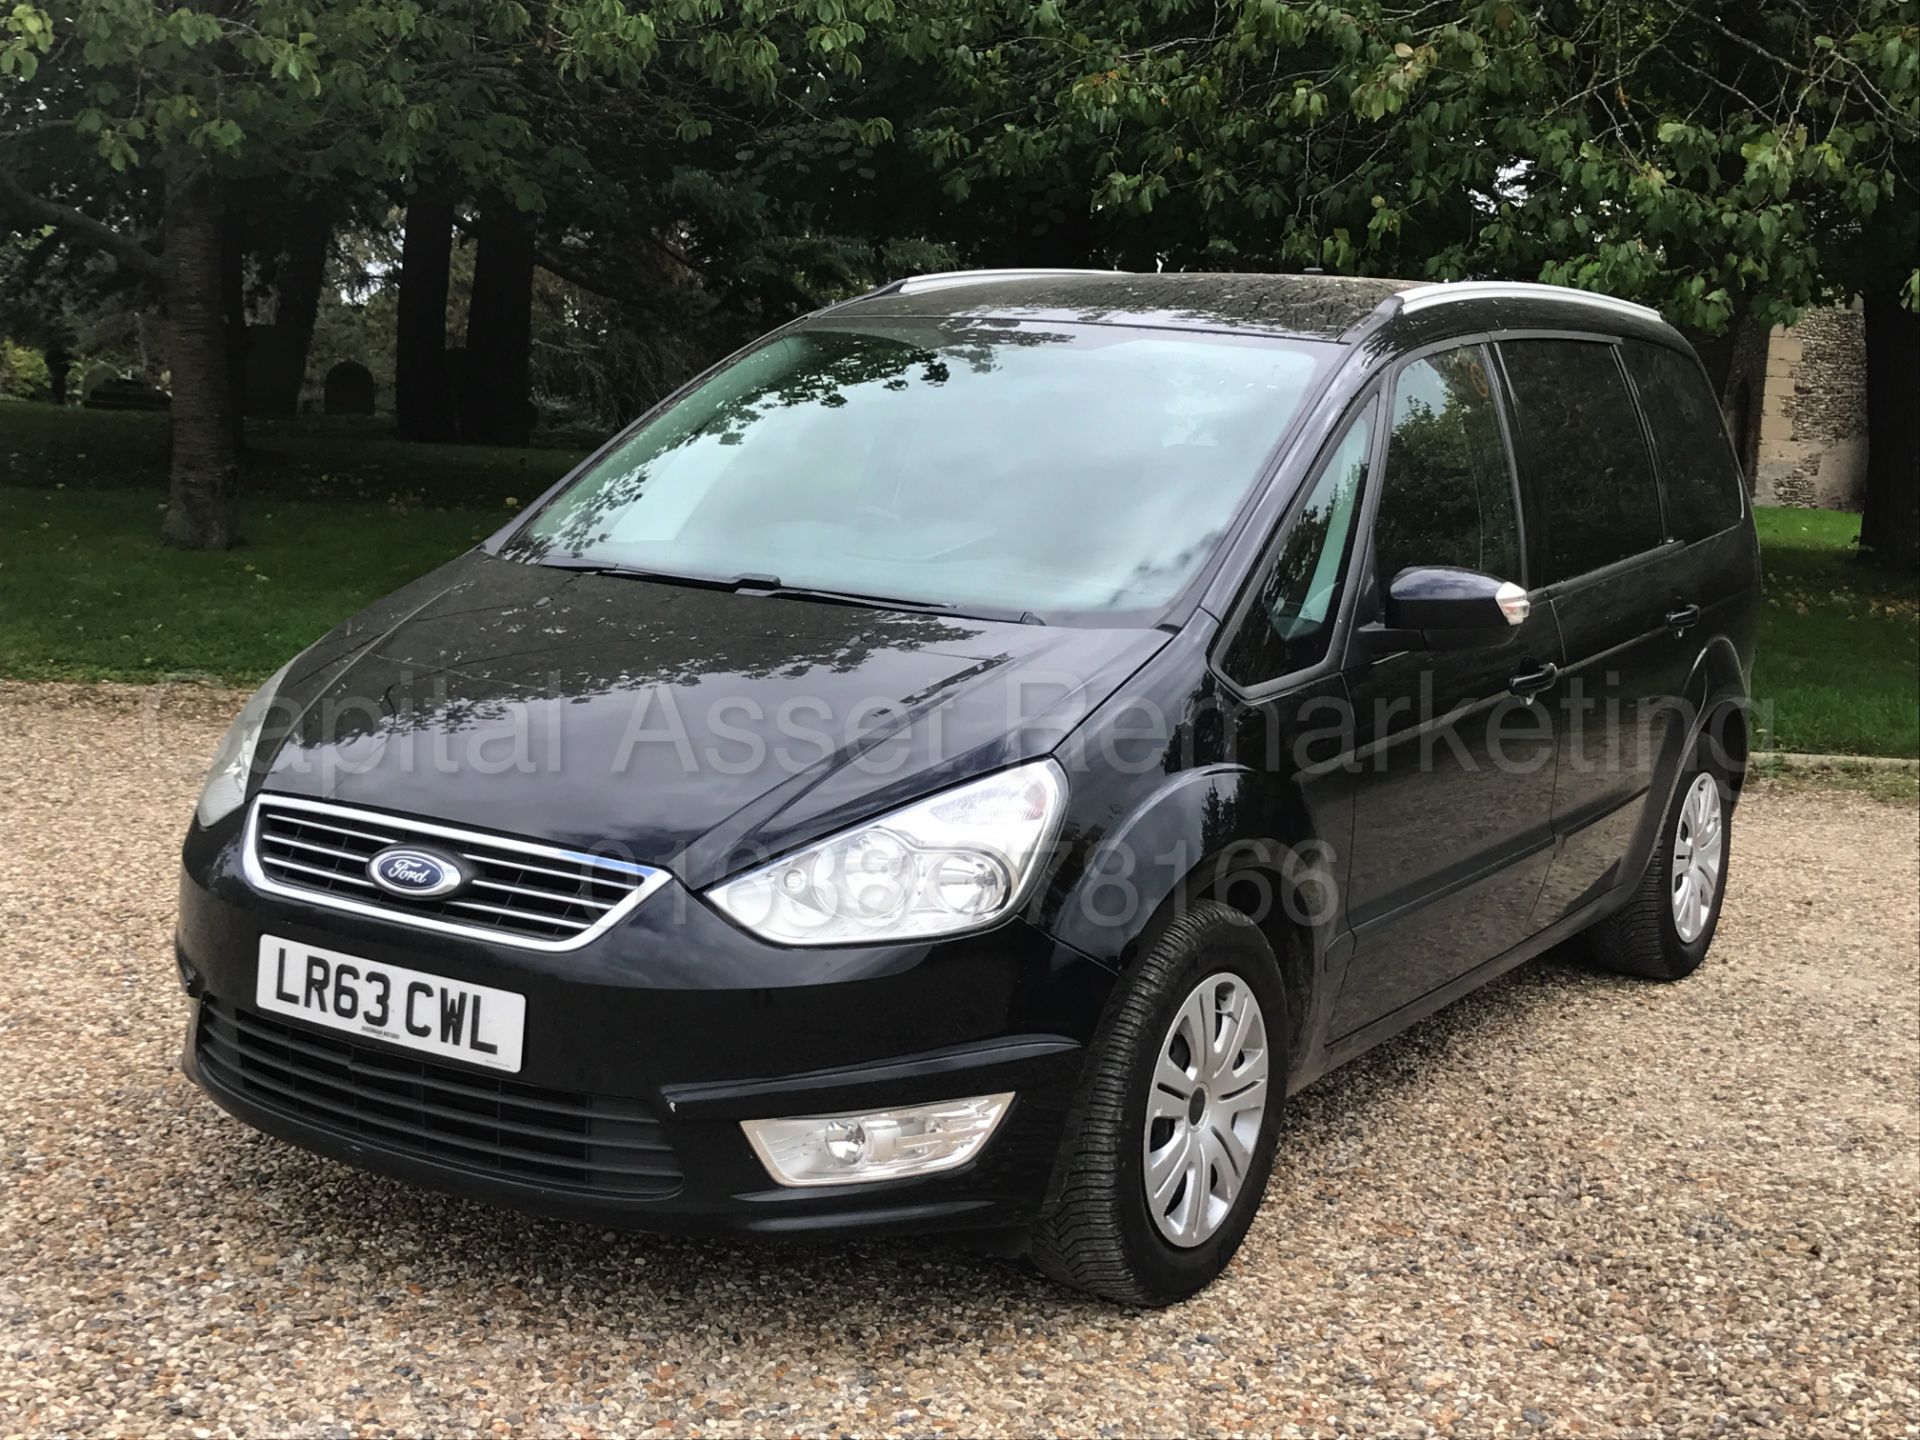 FORD GALAXY 'ZETEC' 7 SEATER MPV (2014 MODEL) '2.0 TDCI - 140 BHP - POWER SHIFT' (1 OWNER FROM NEW) - Image 4 of 27